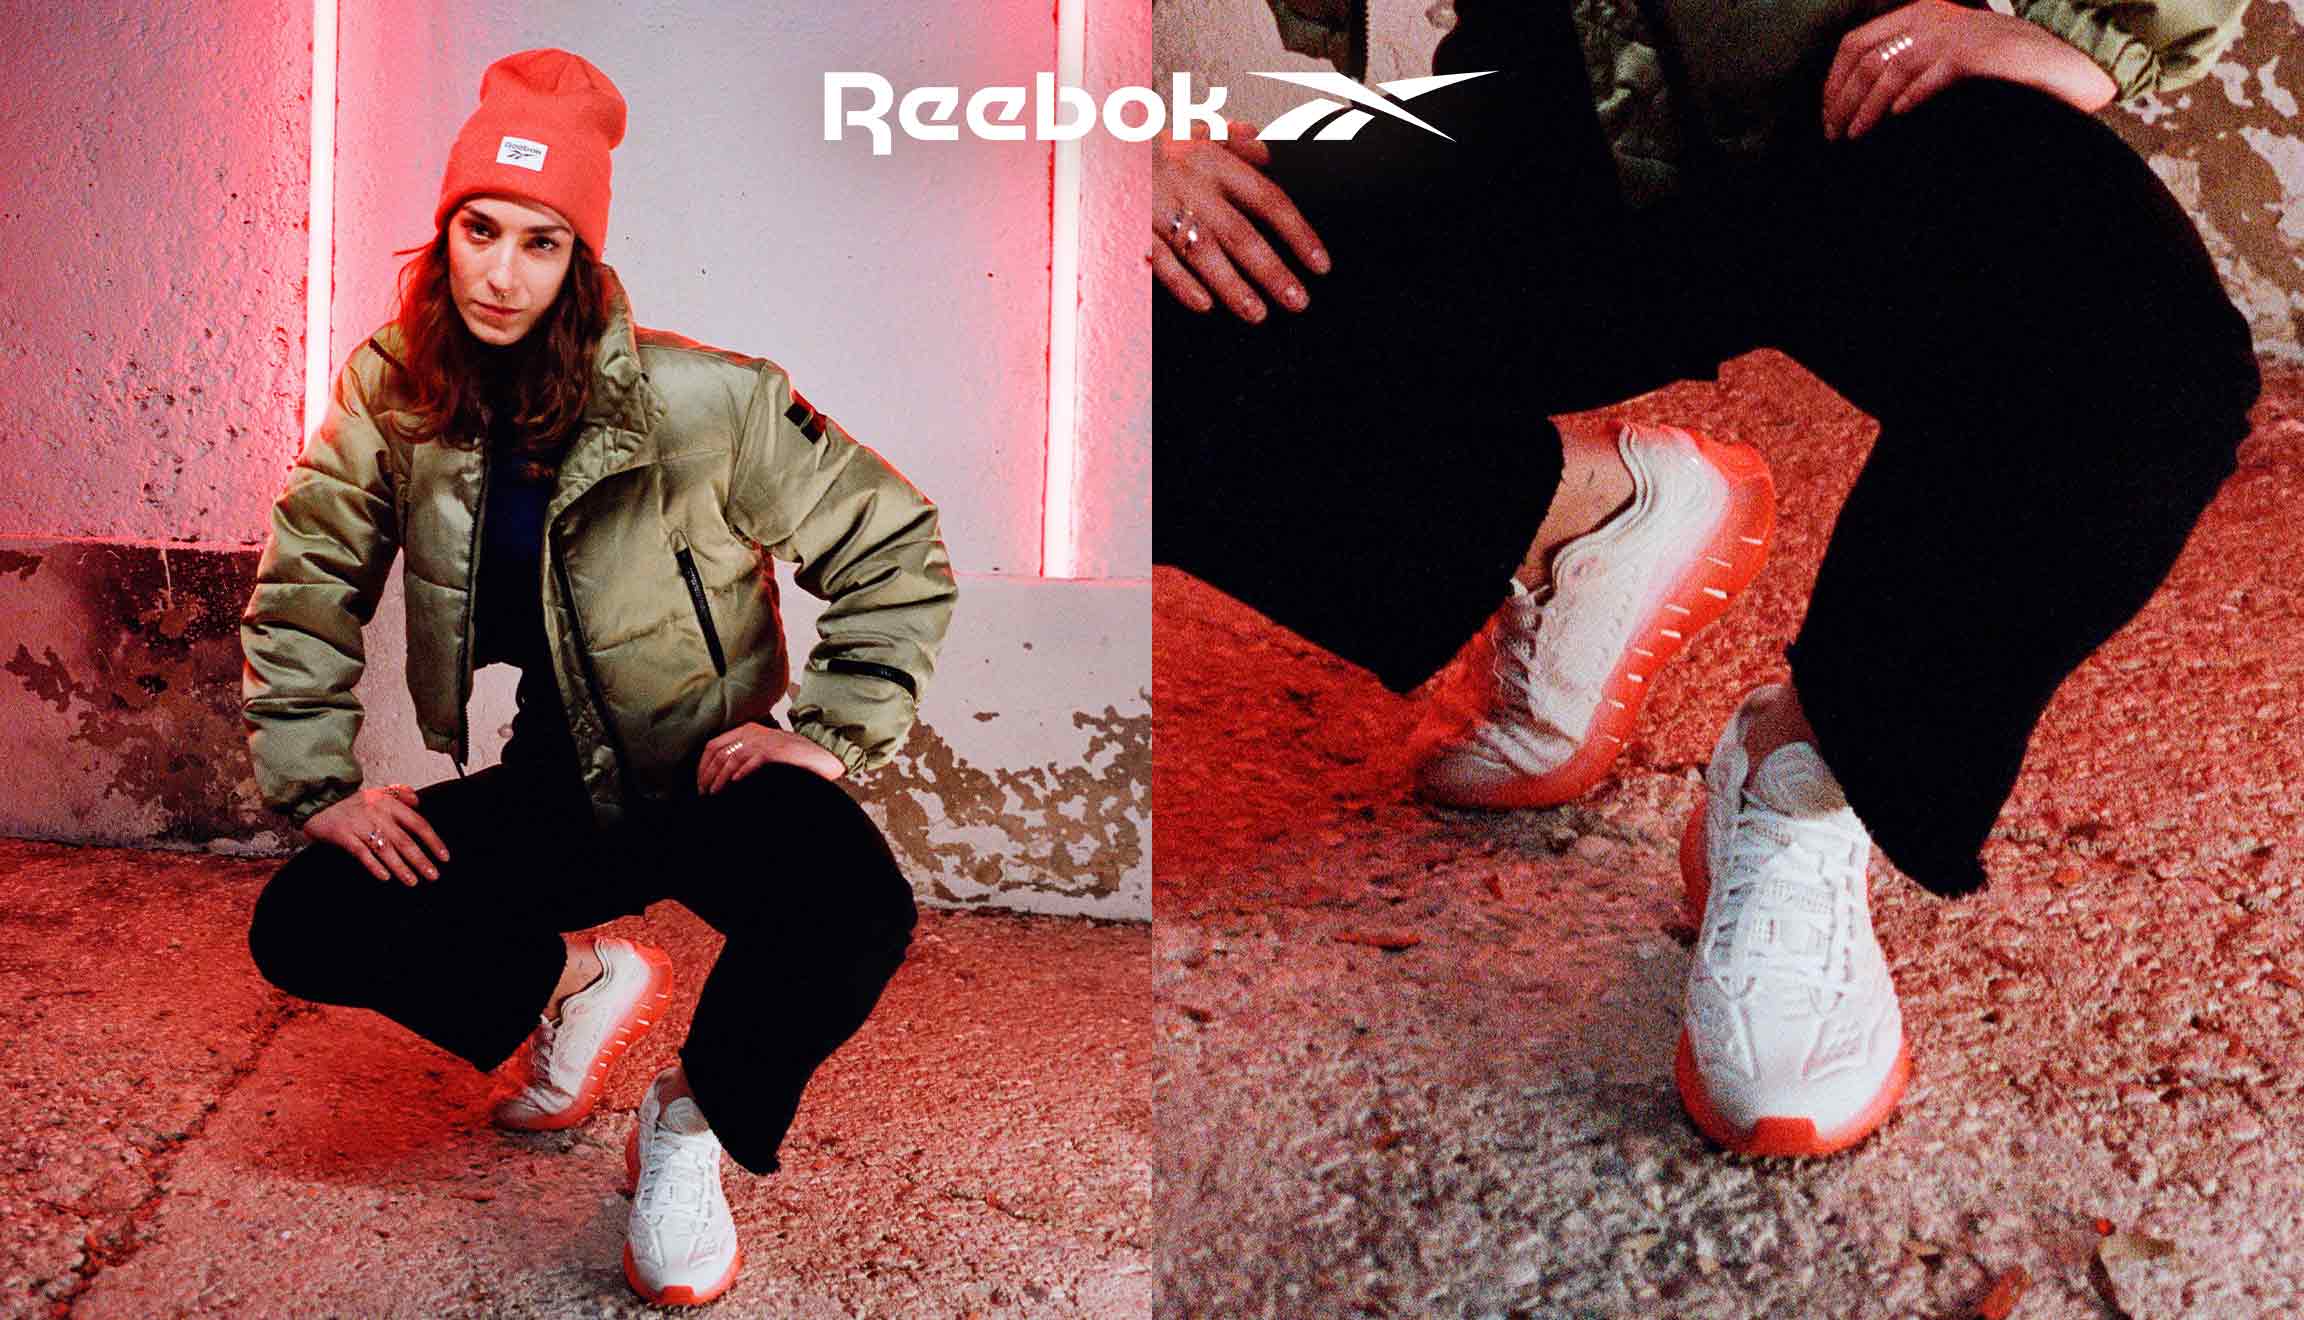 Zalando: How Reebok leverages data to understand customers and steer brand perception | Corporate